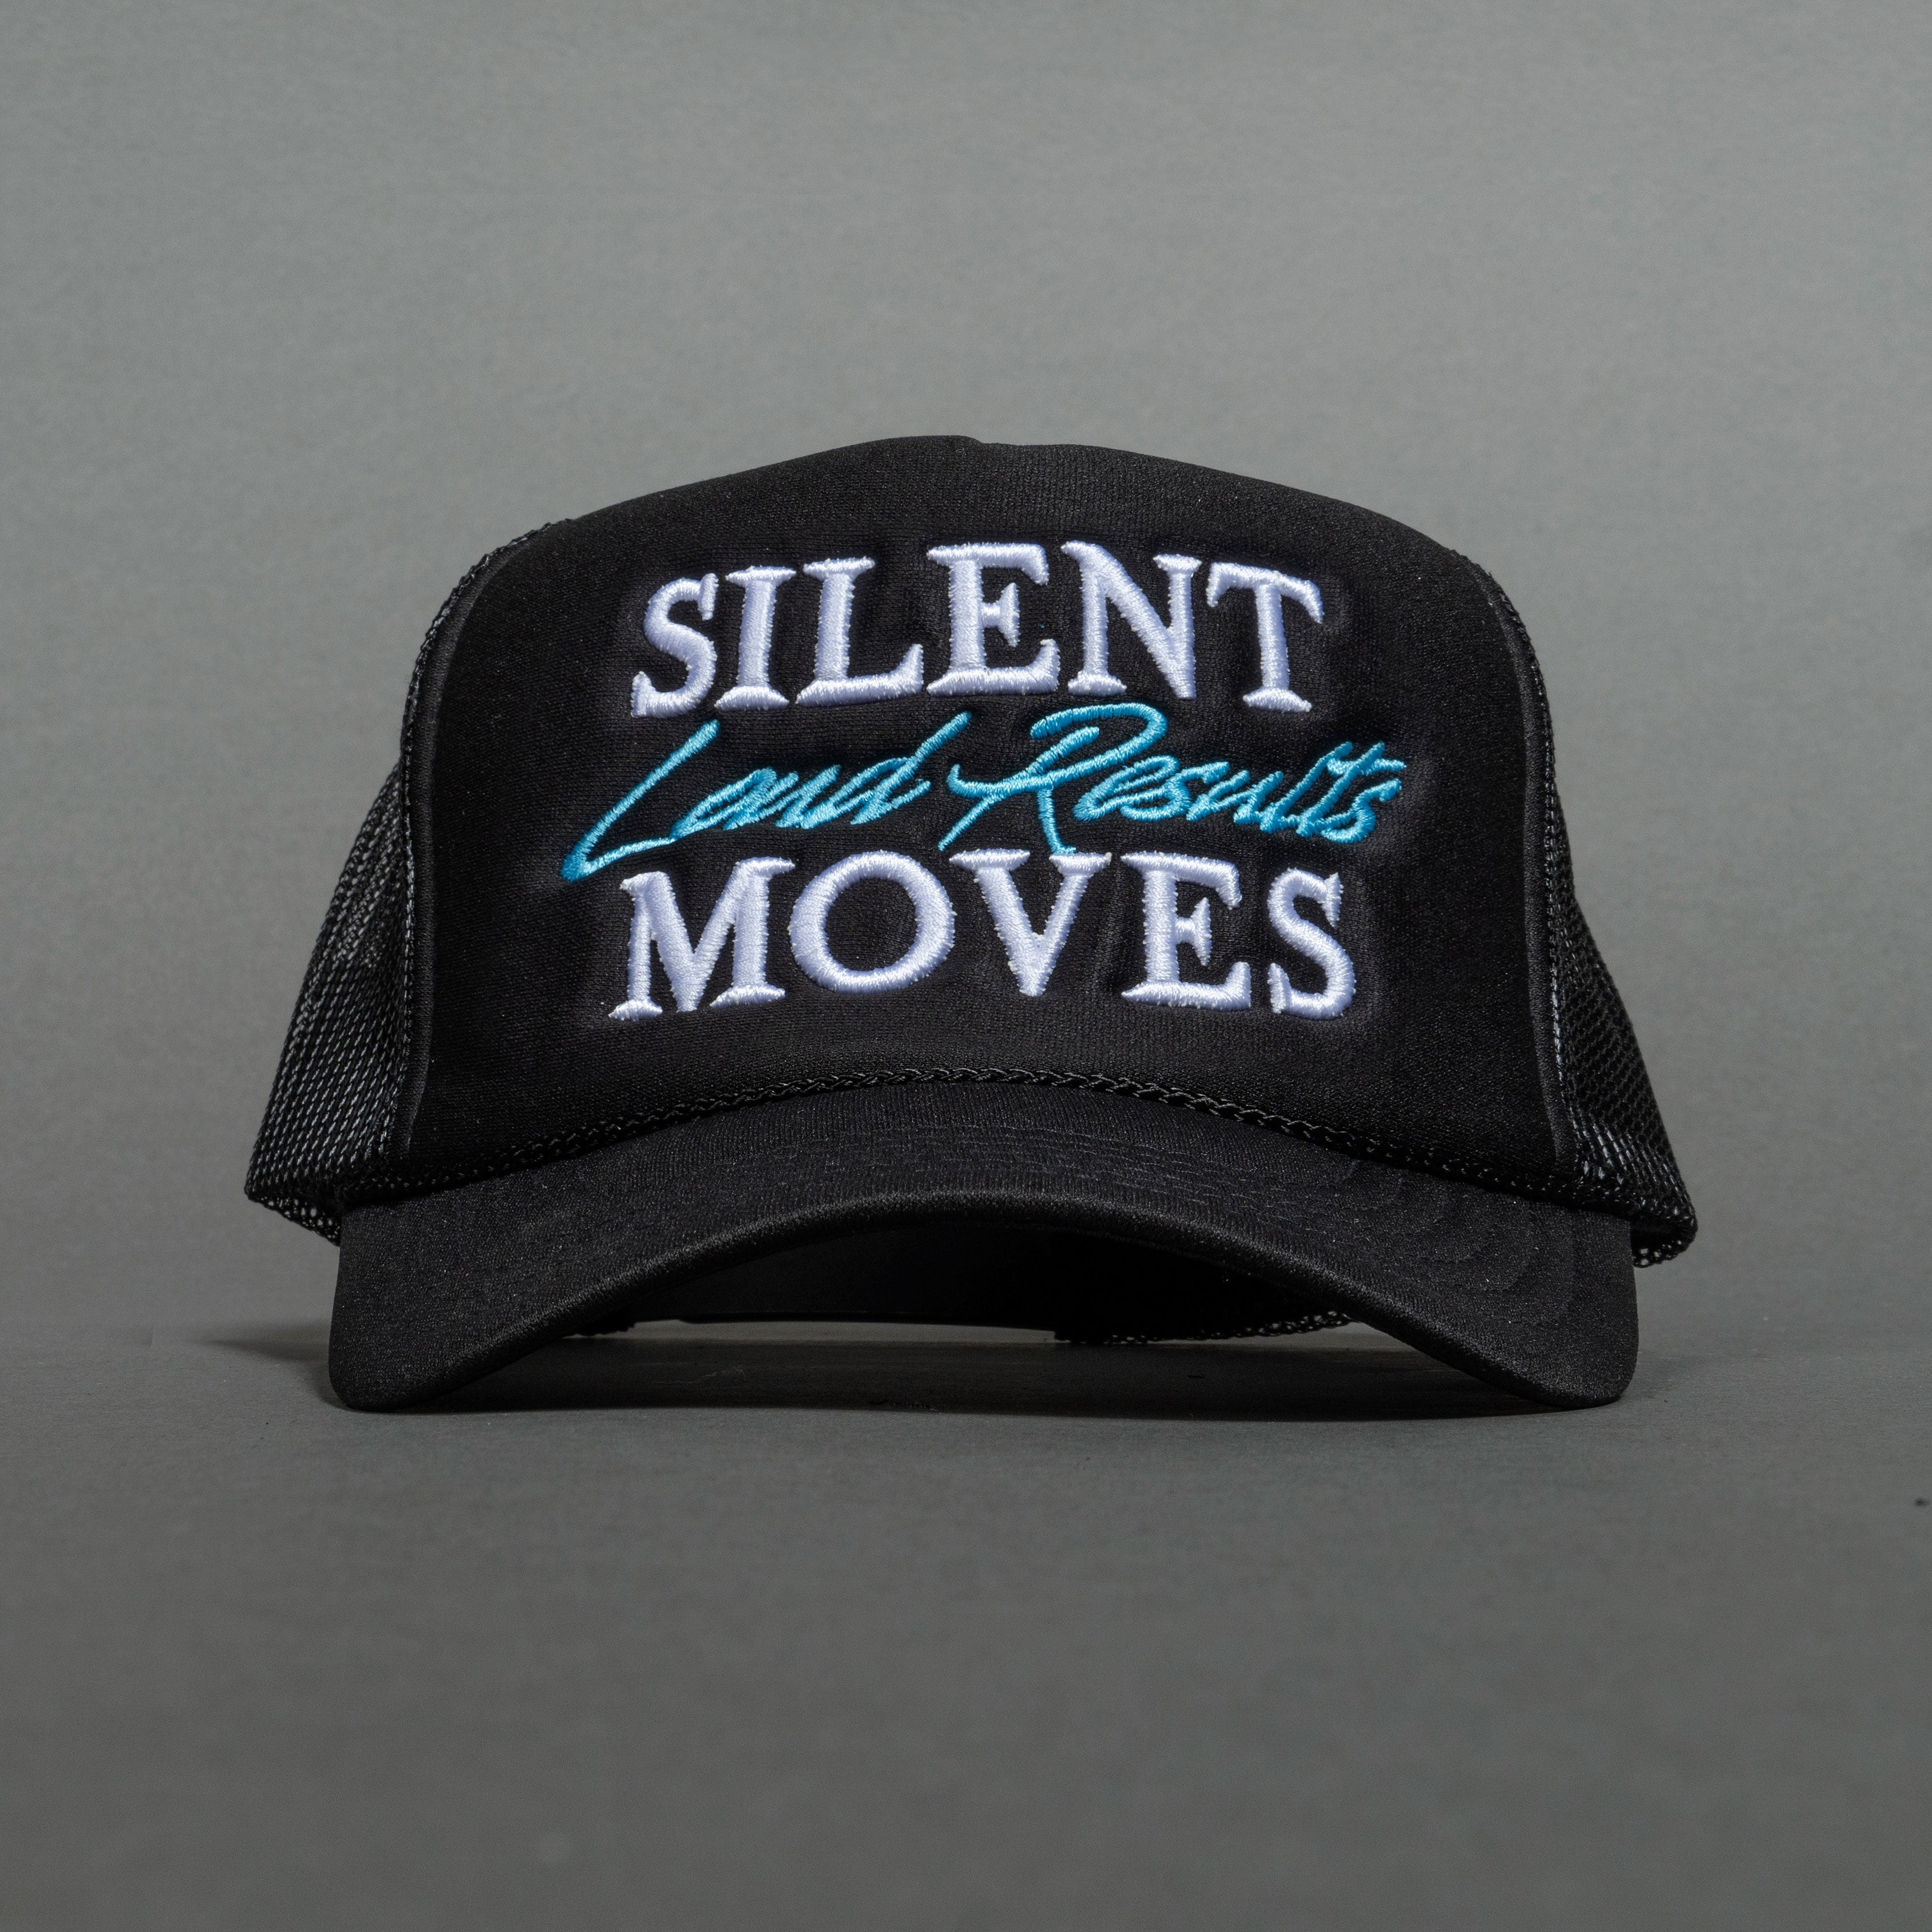 Silent Moves Loud Results Trucker Hat